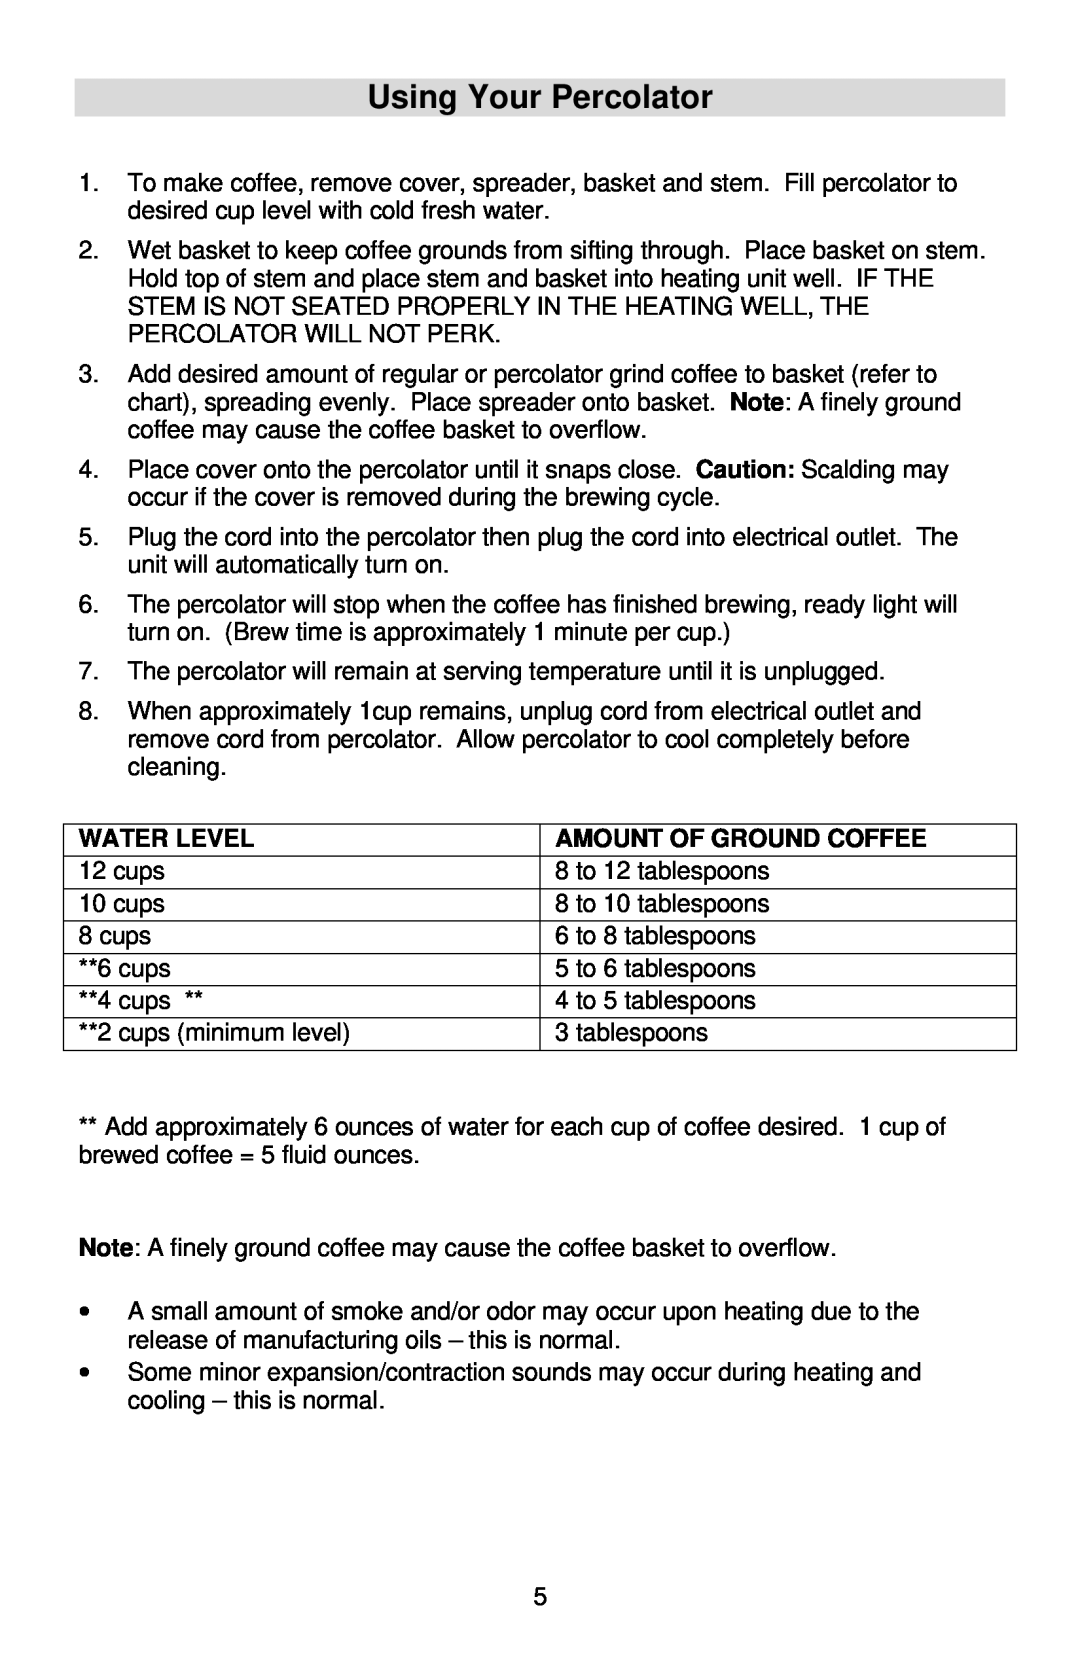 West Bend Coffeemaker manual Using Your Percolator, Water Level, Amount Of Ground Coffee 